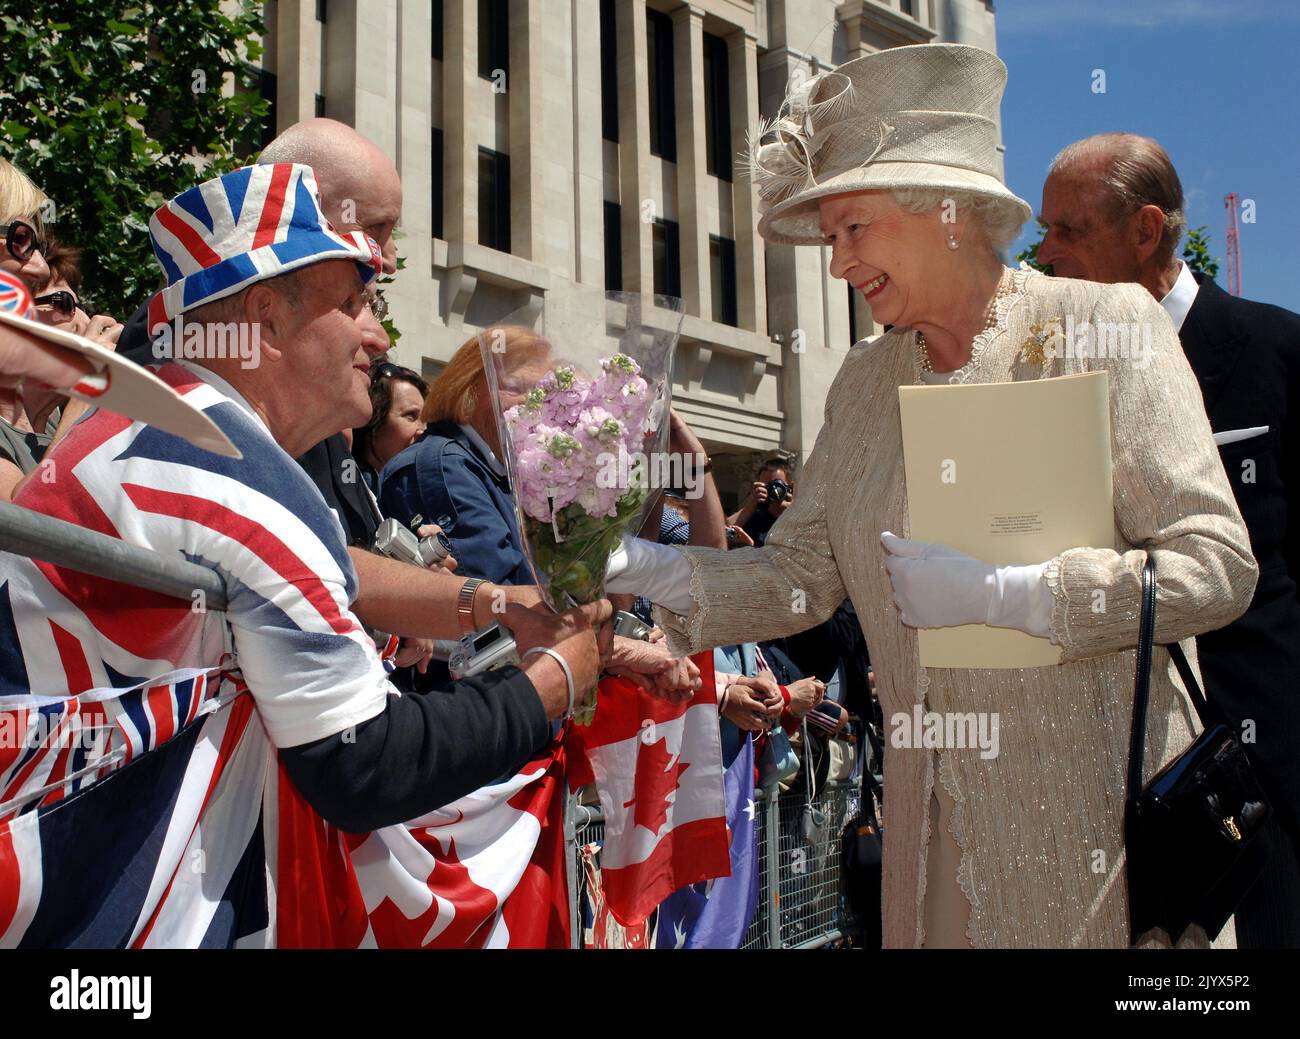 File photo dated 15/06/2006 of Queen Elizabeth II accepting flowers from Royal fan Terry Hutt outside at St Paul's Cathedral, London, after a service of thanksgiving in honour of her 80th birthday. The Queen died peacefully at Balmoral this afternoon, Buckingham Palace has announced. Issue date: Thursday September 8, 2022. Stock Photo